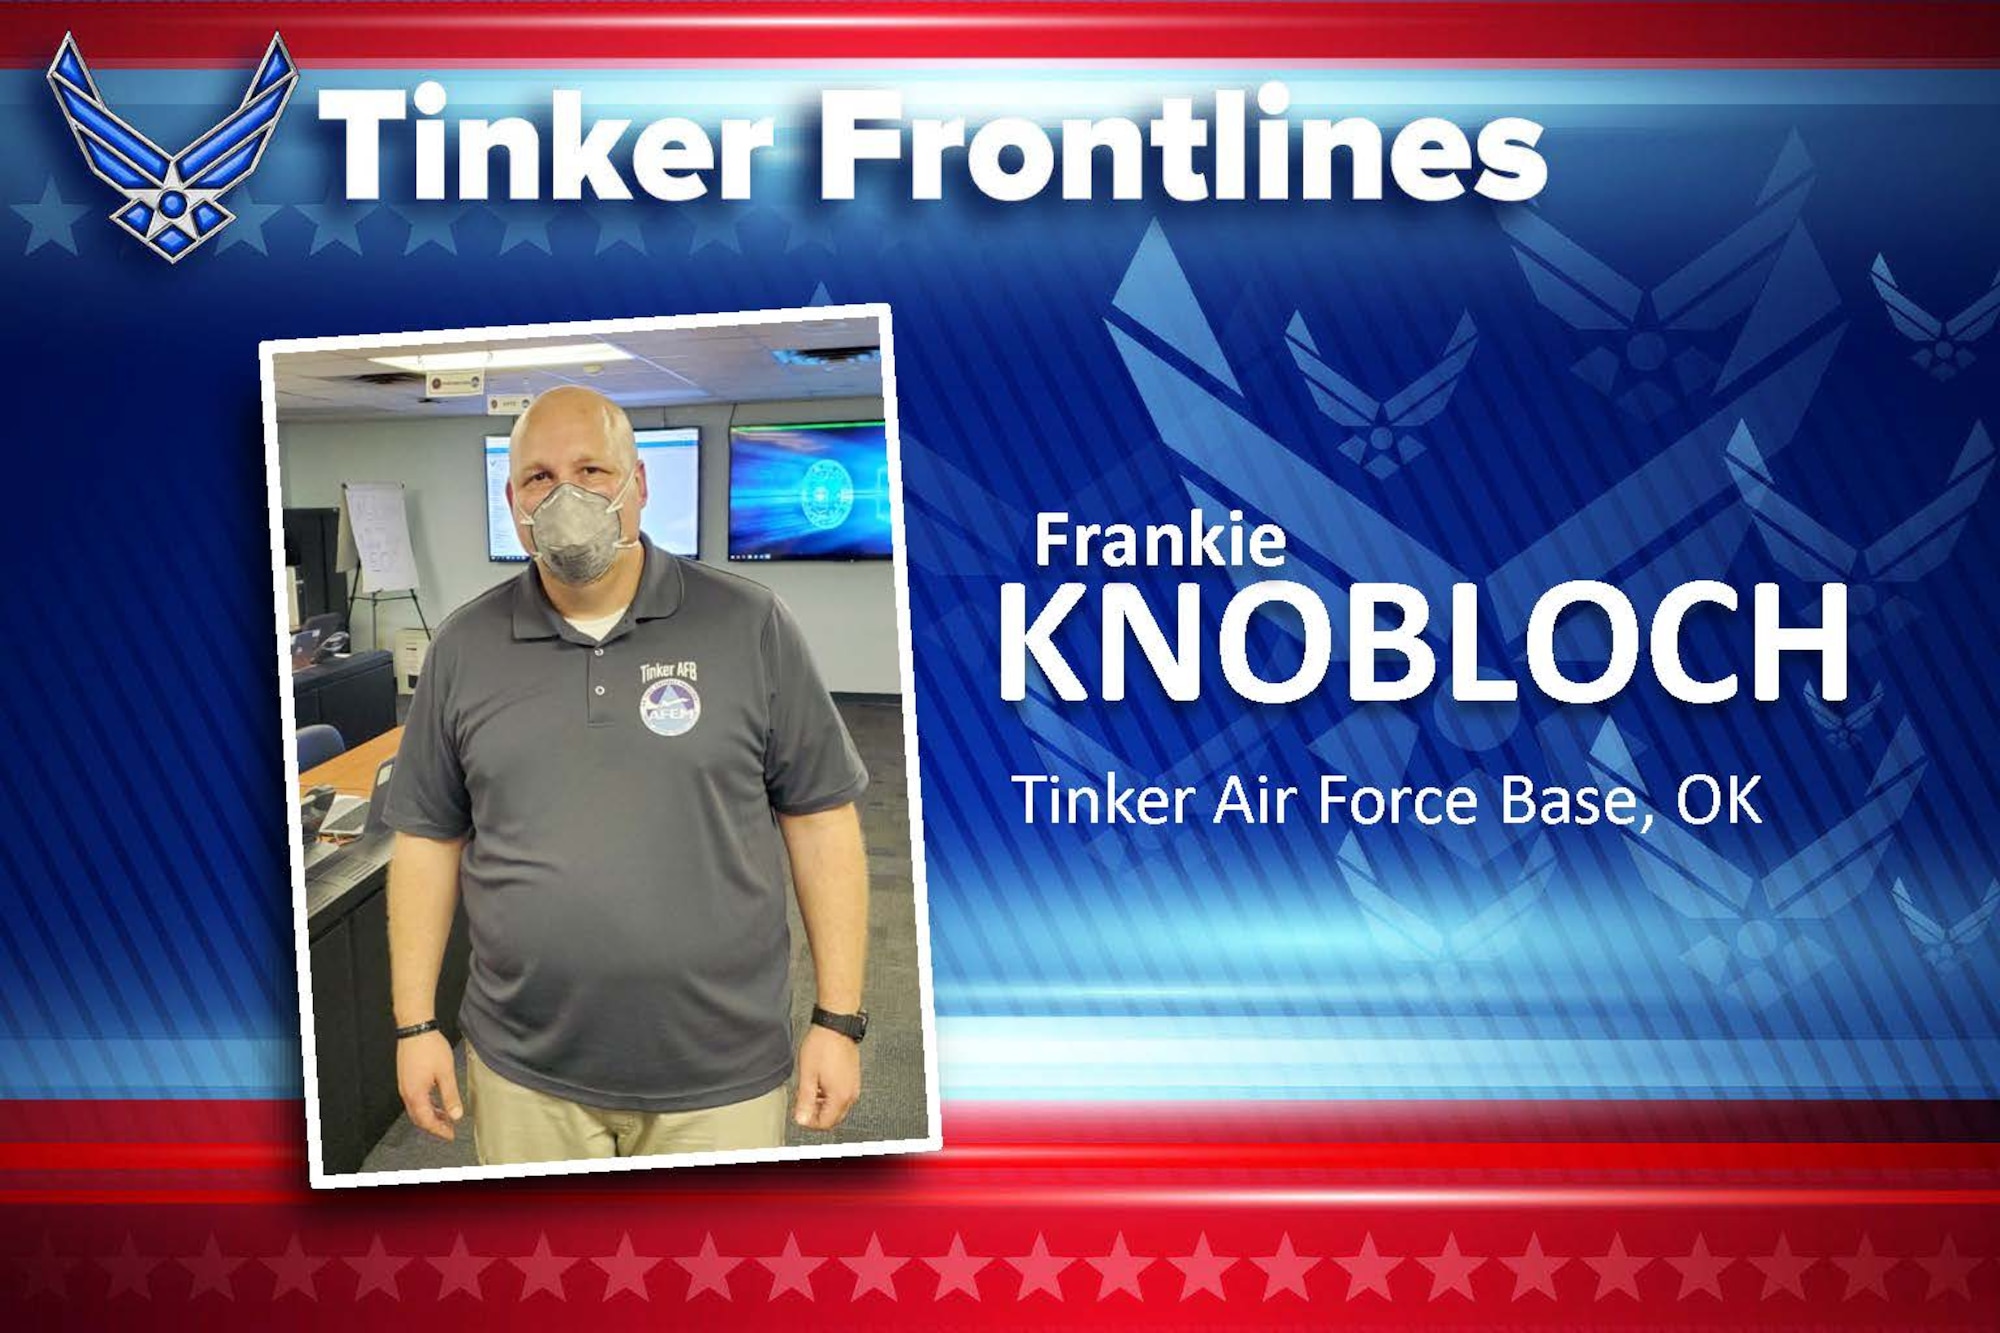 Frankie Knobloch has been an emergency management specialist in the Emergency Operations Center for four months.